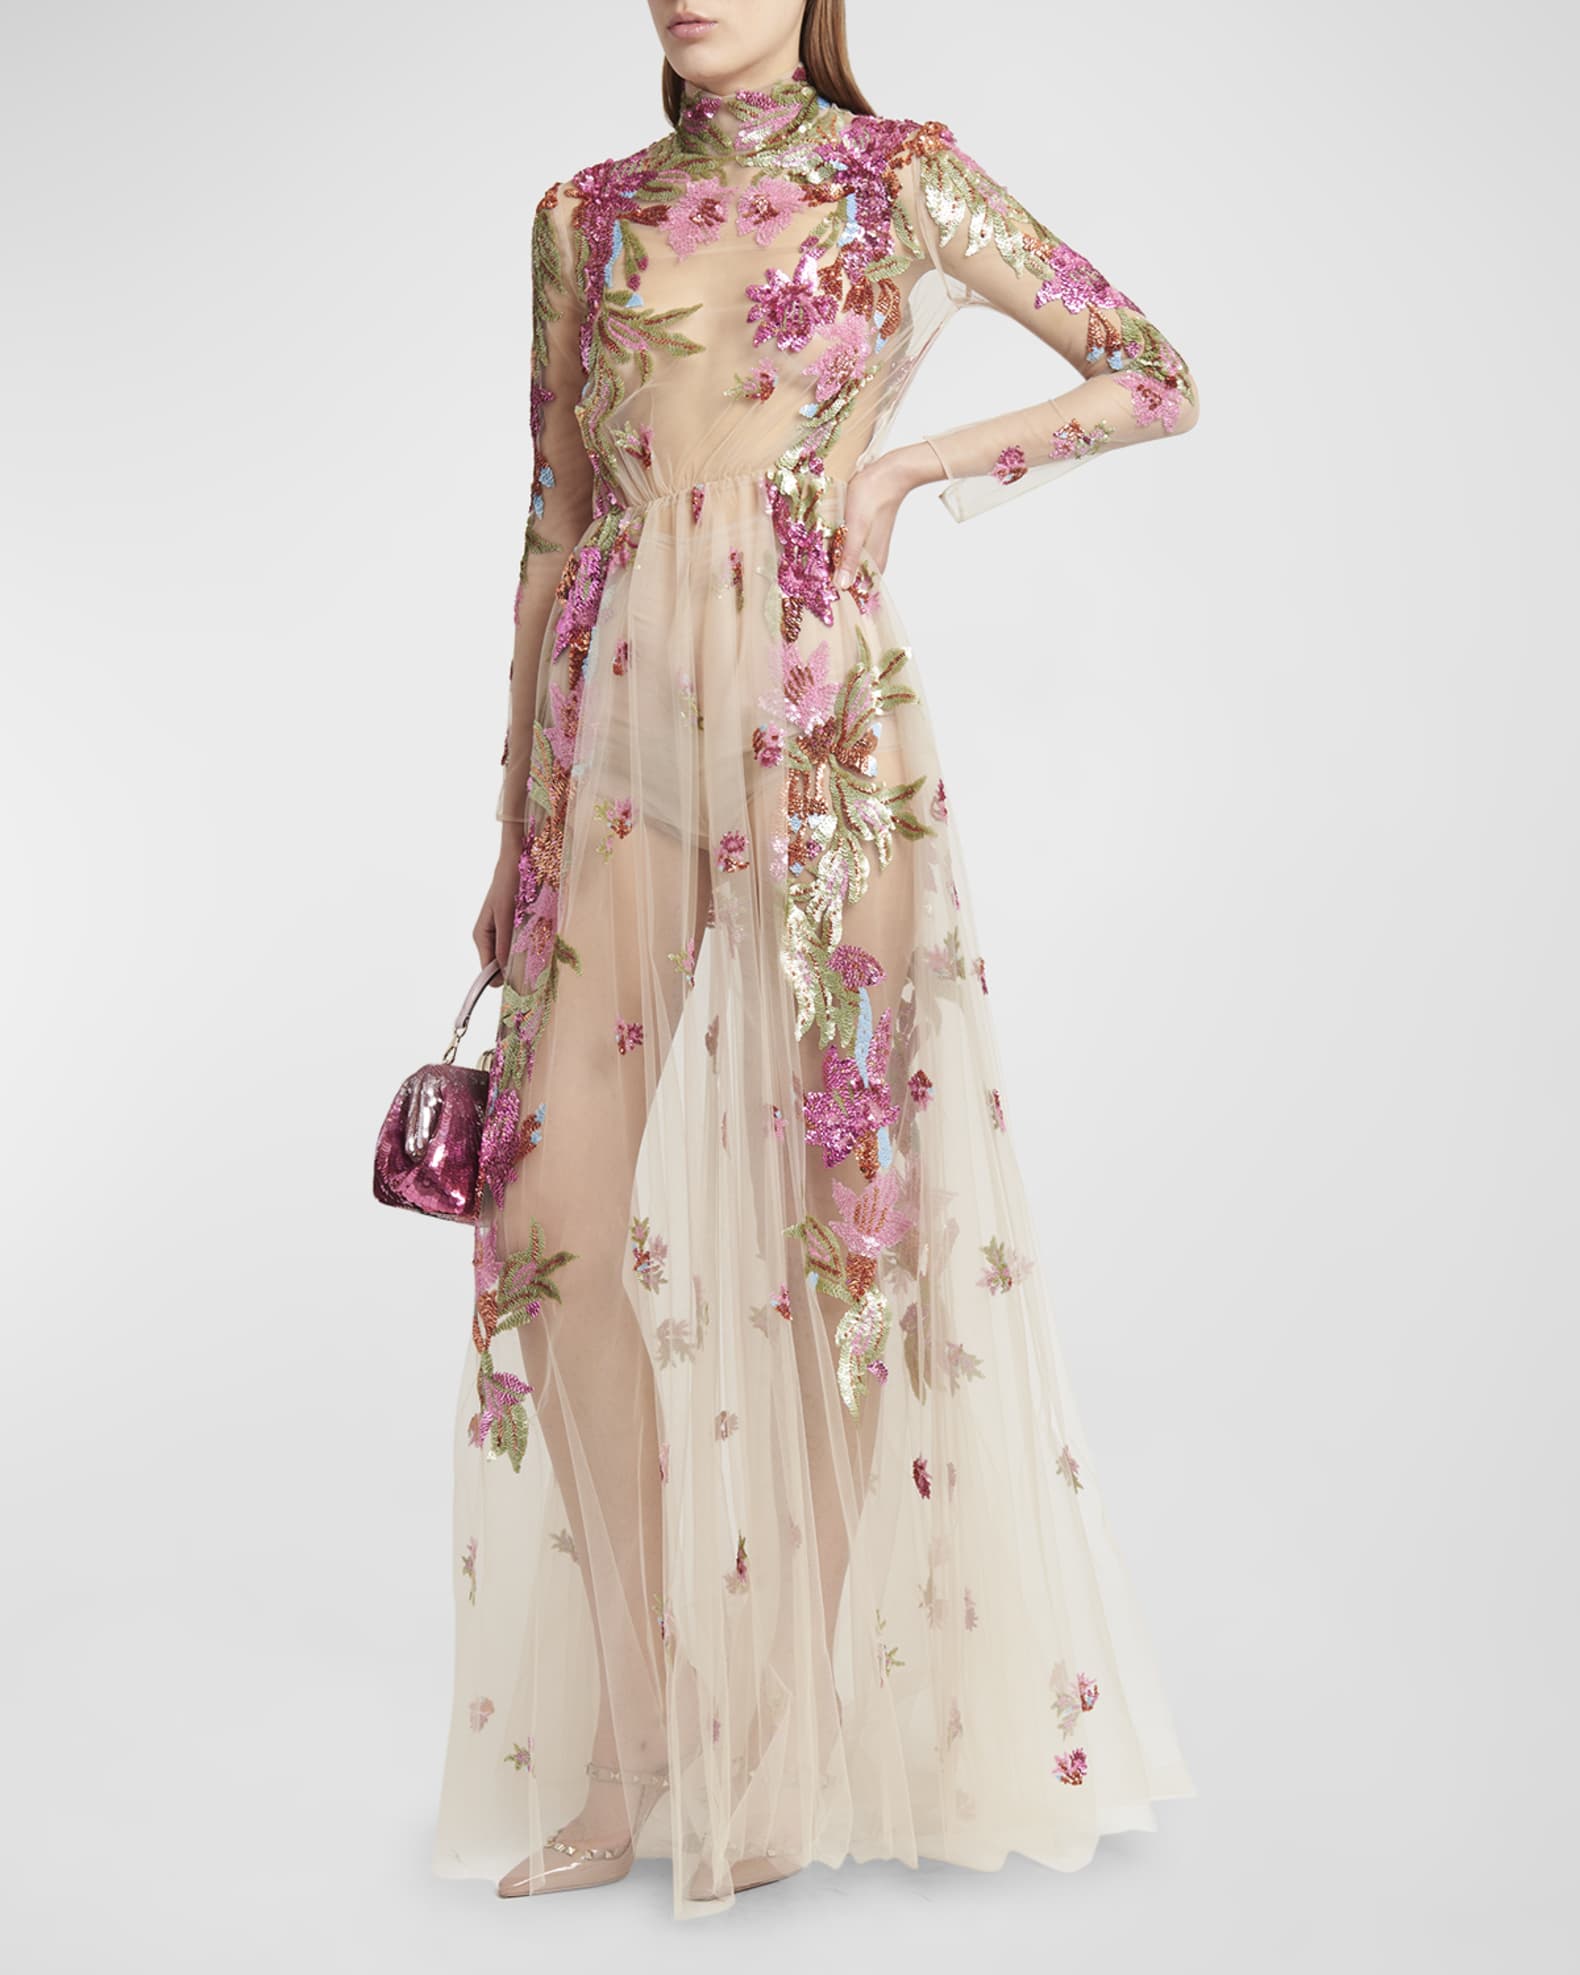 Valentino Garavani Embroidered Tulle Illusion Gown with Floral Details ...